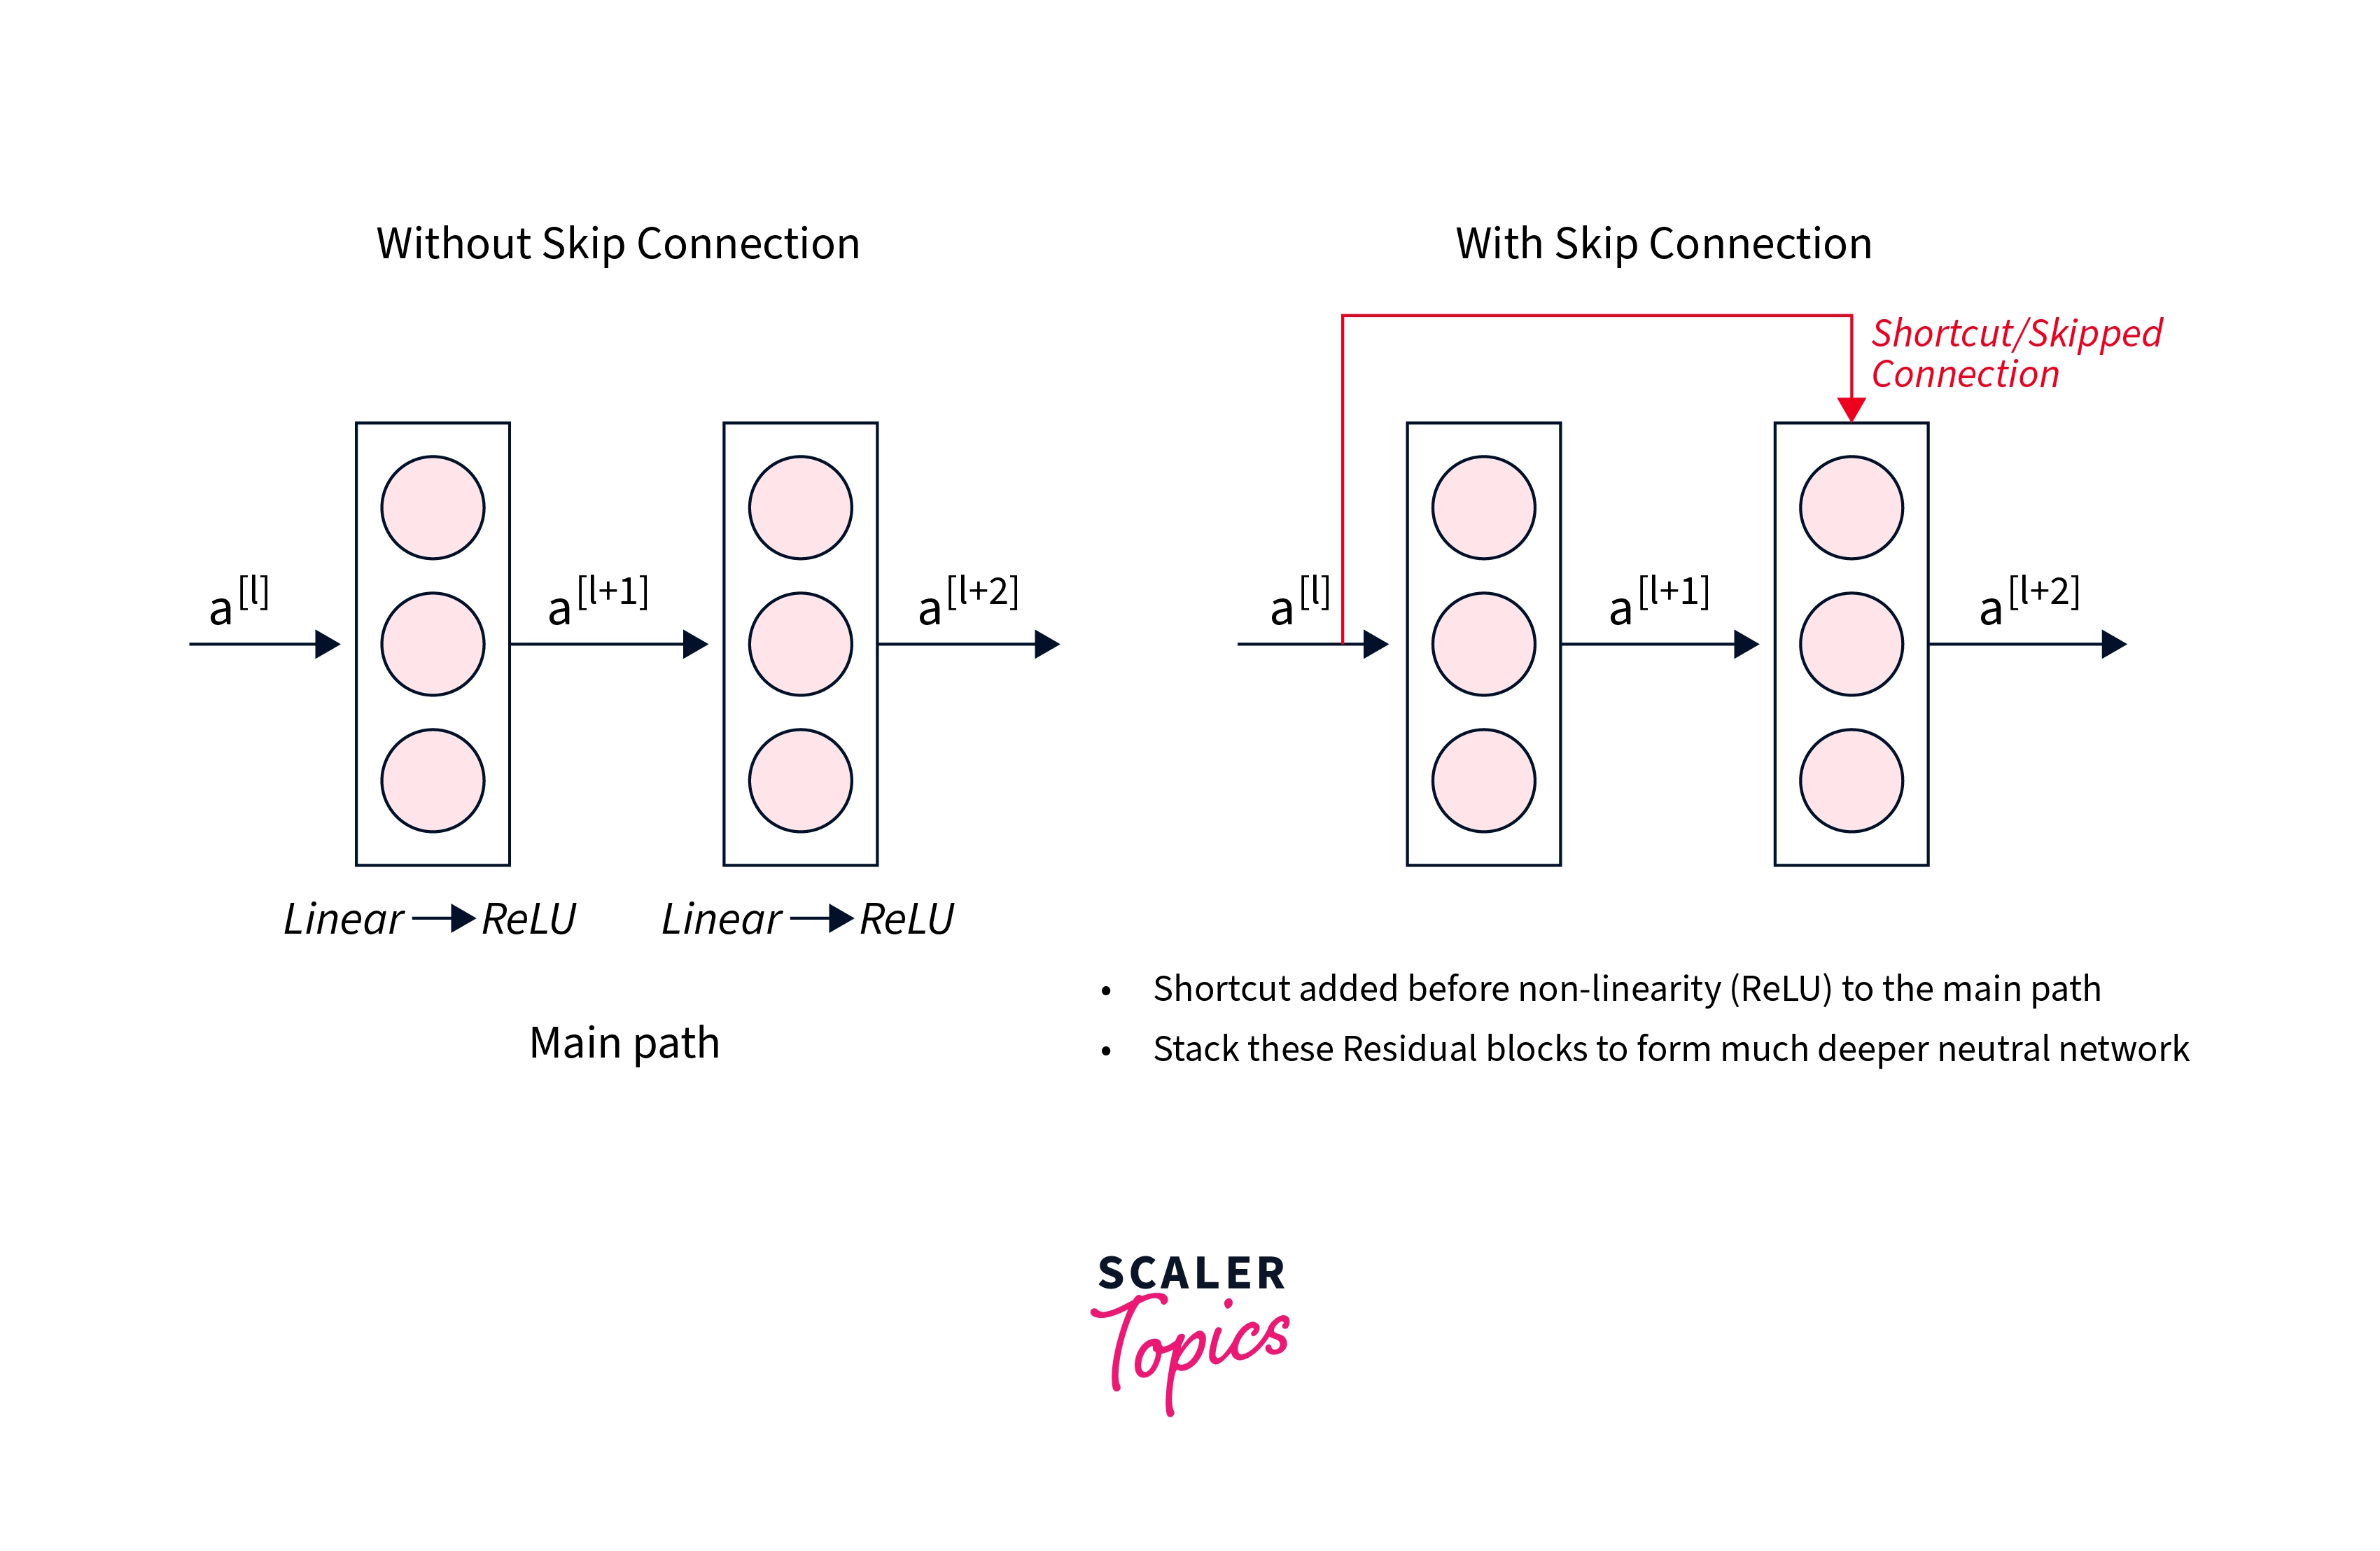 SKIP CONNECTIONS